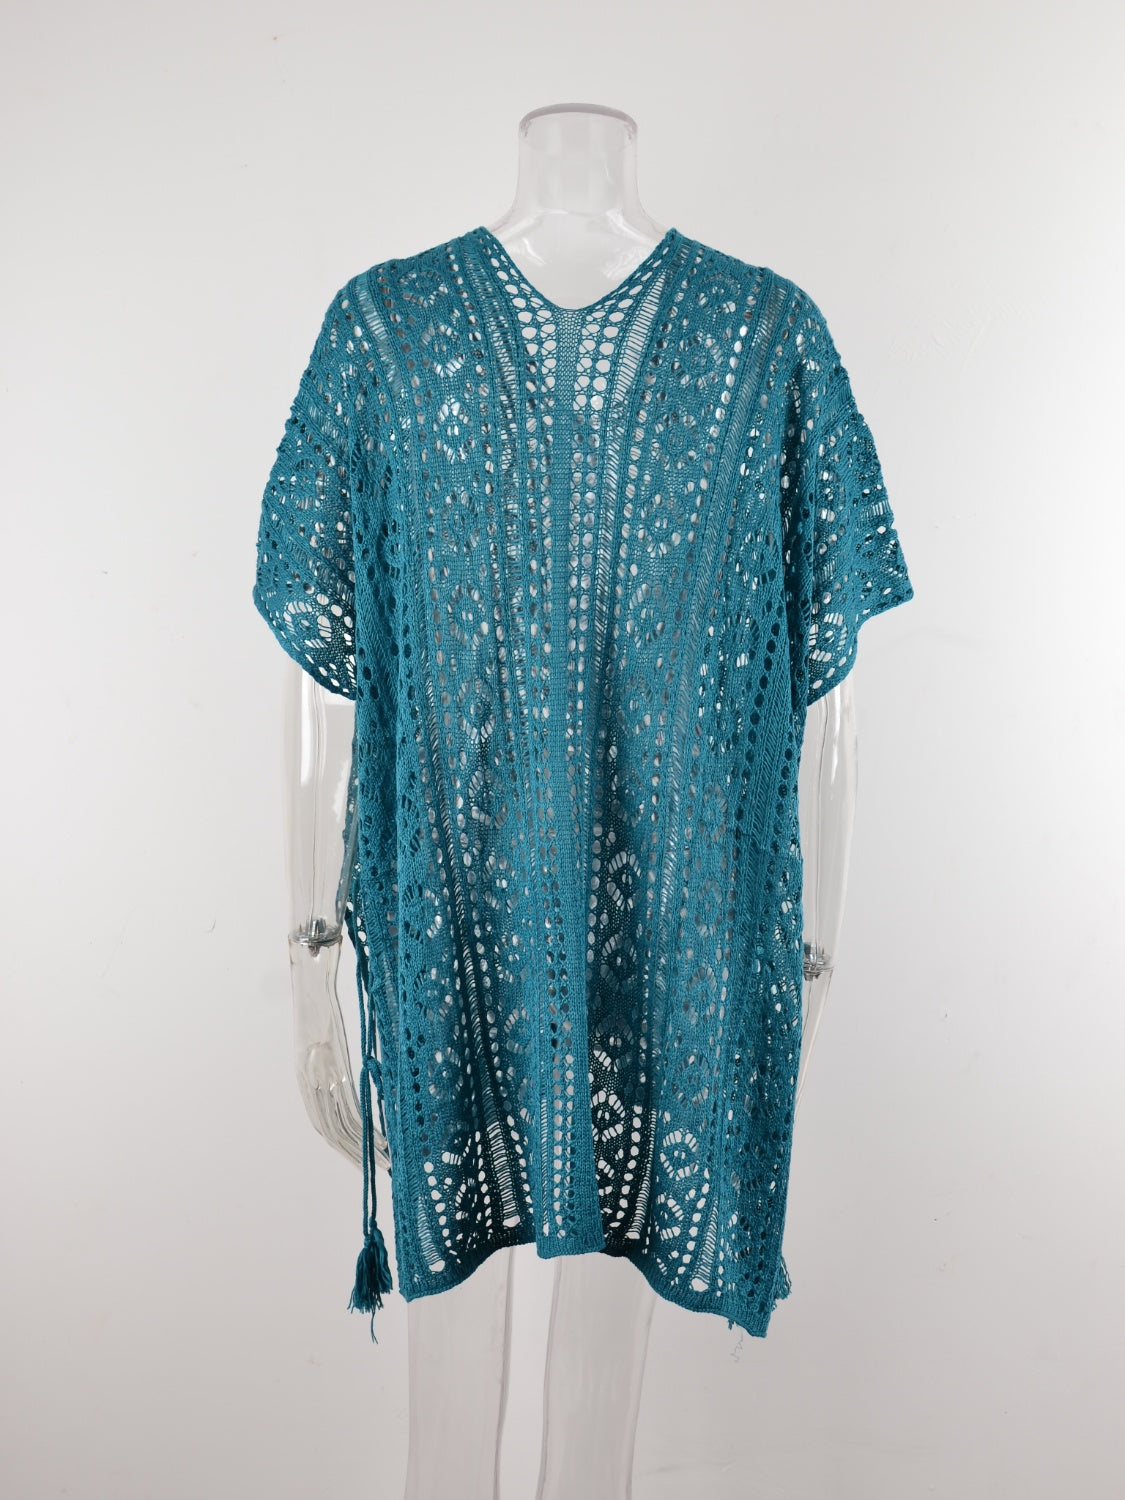 Cutout V-Neck Cover-Up with Tassel